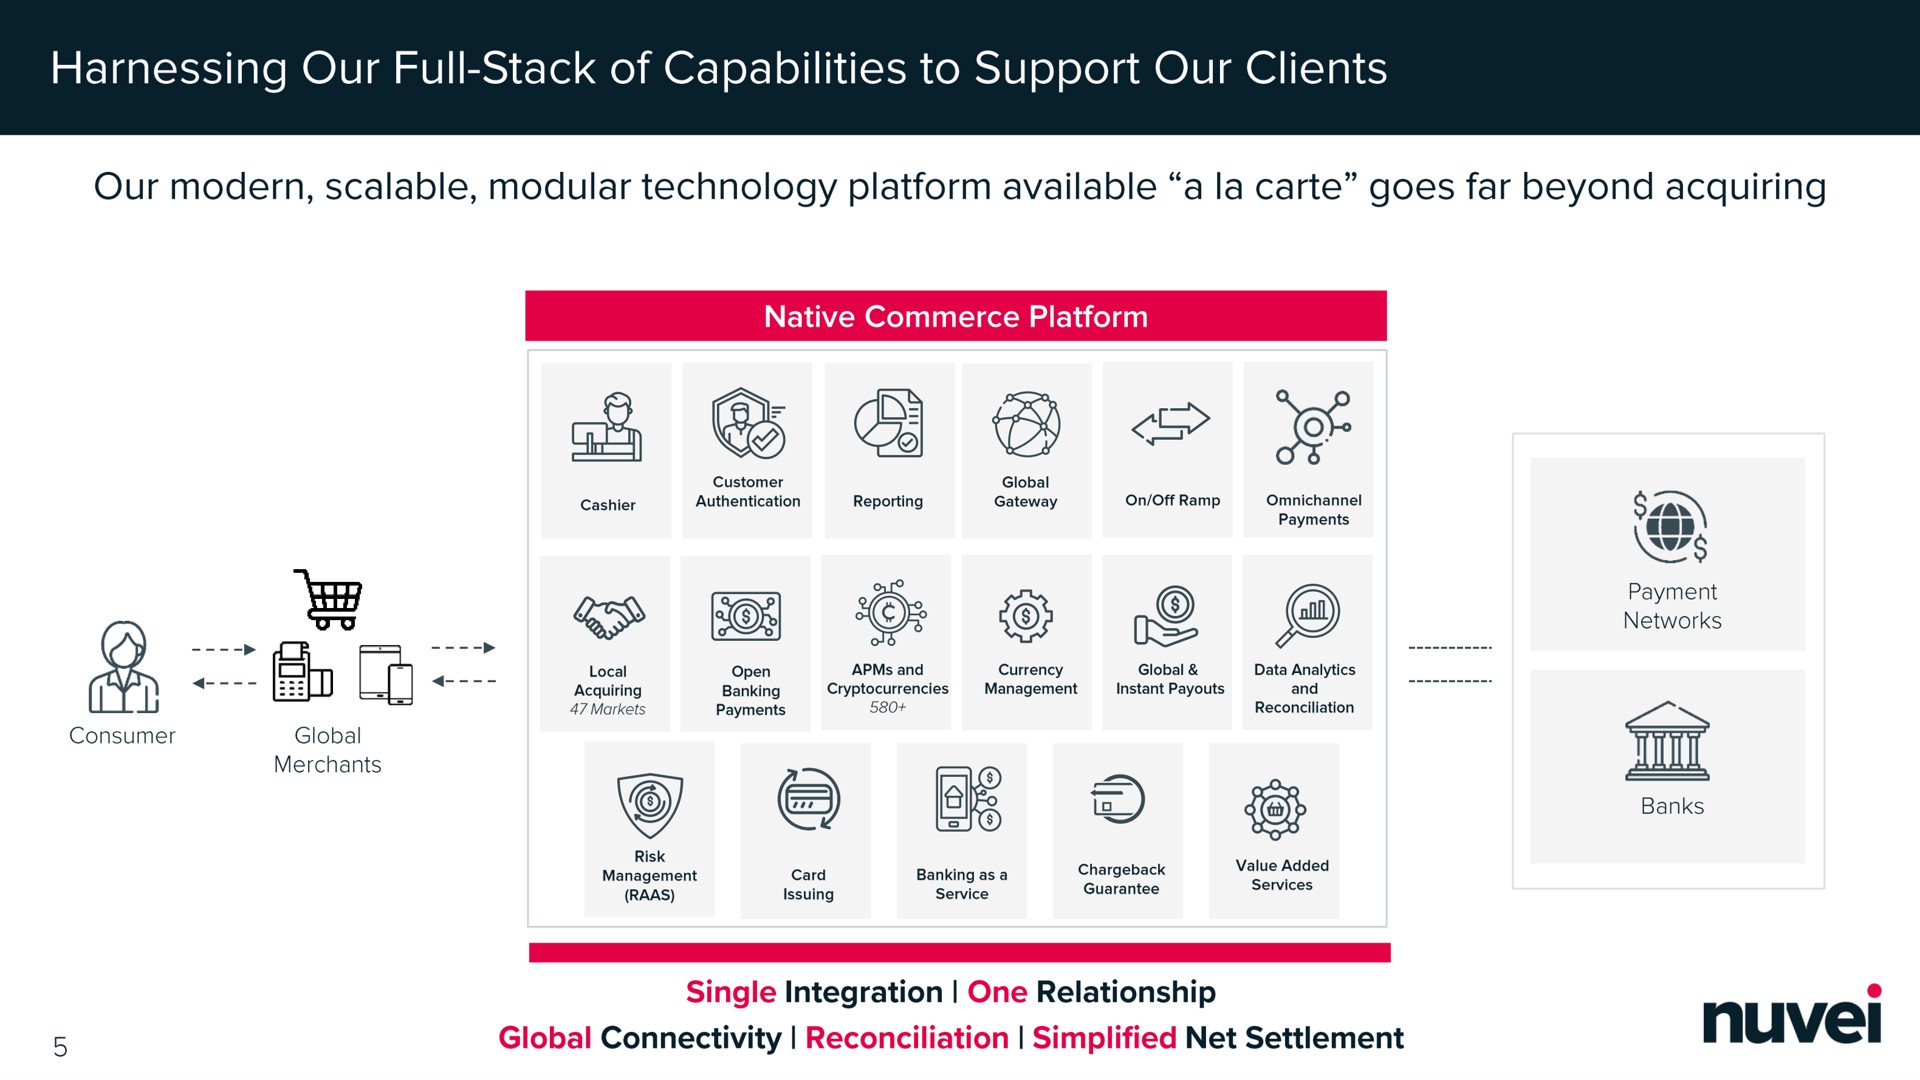 harnessing our full stack of capabilities to support our clients our modern scalable modular technology platform available a carte goes far beyond acquiring global connectivity reconciliation simplified net settlement | Nuvei